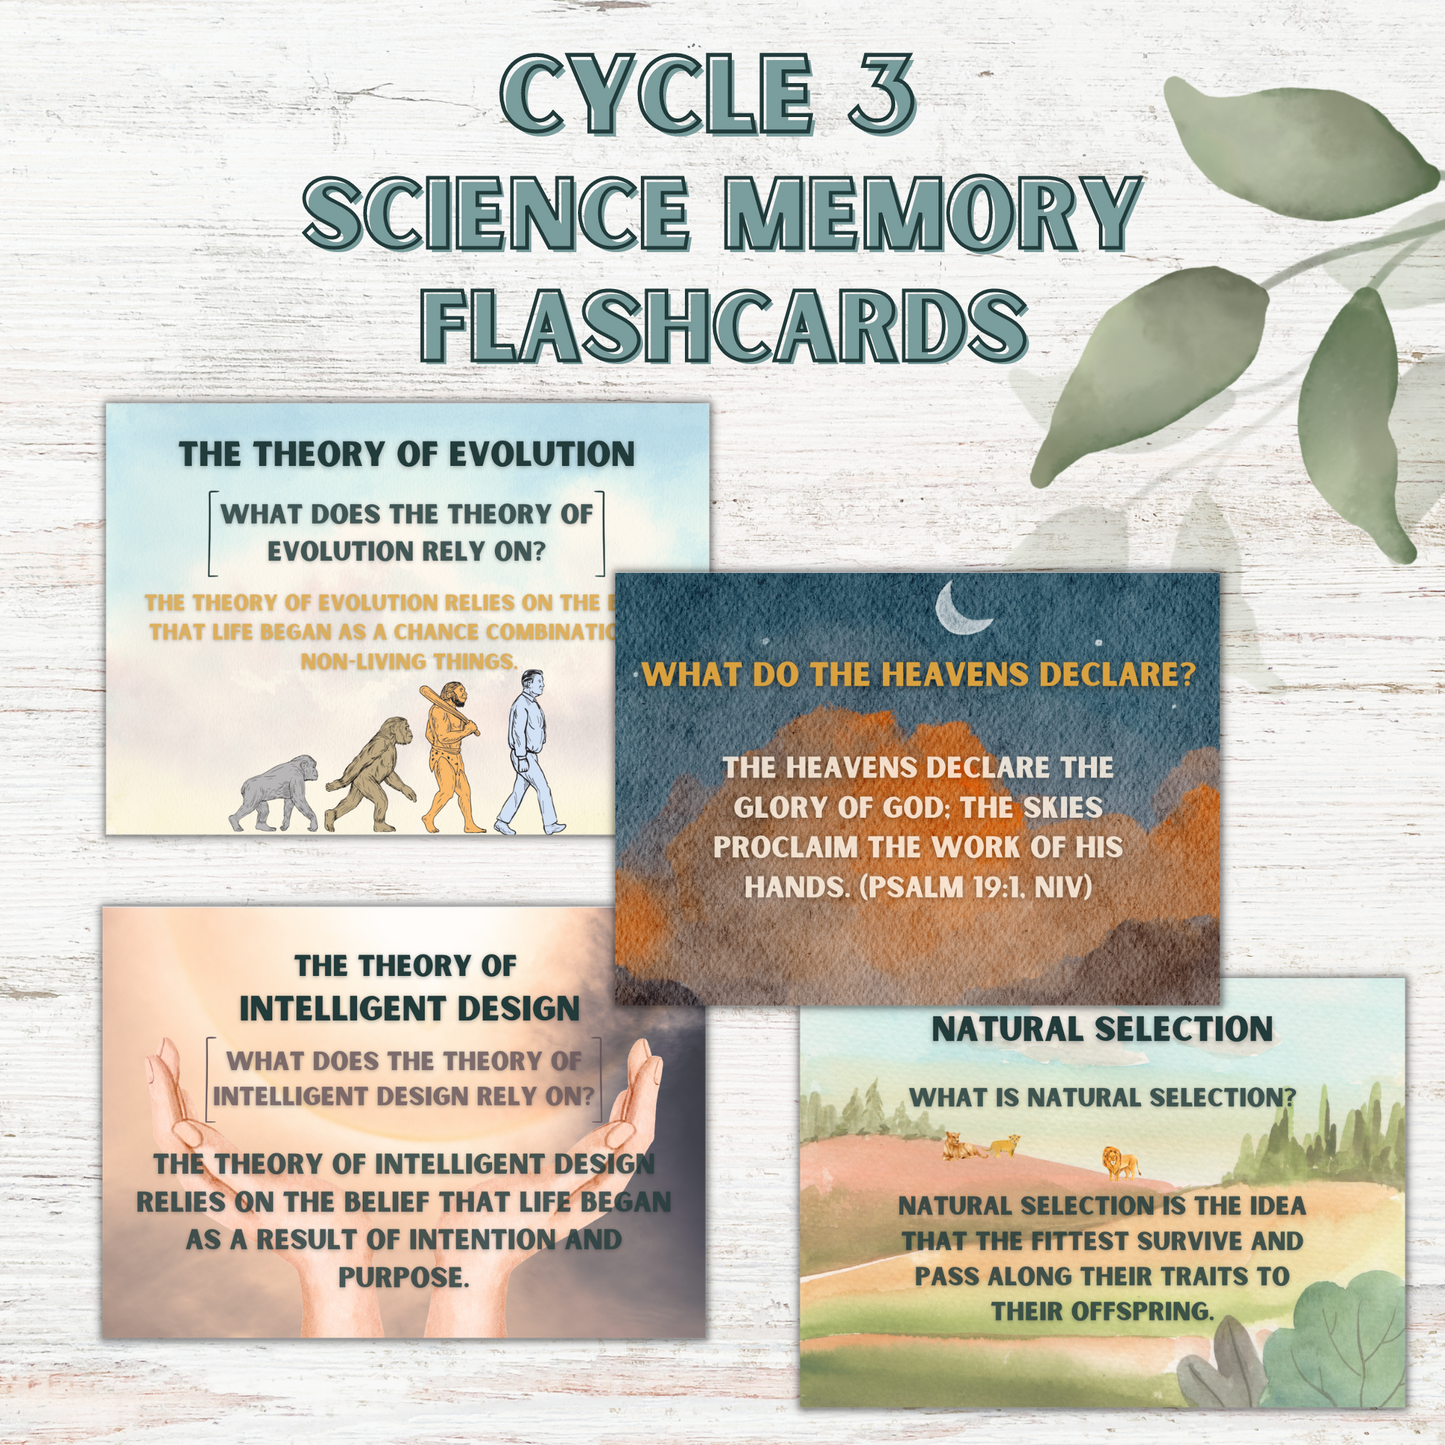 Science Memory Cards | CC Cycle 3